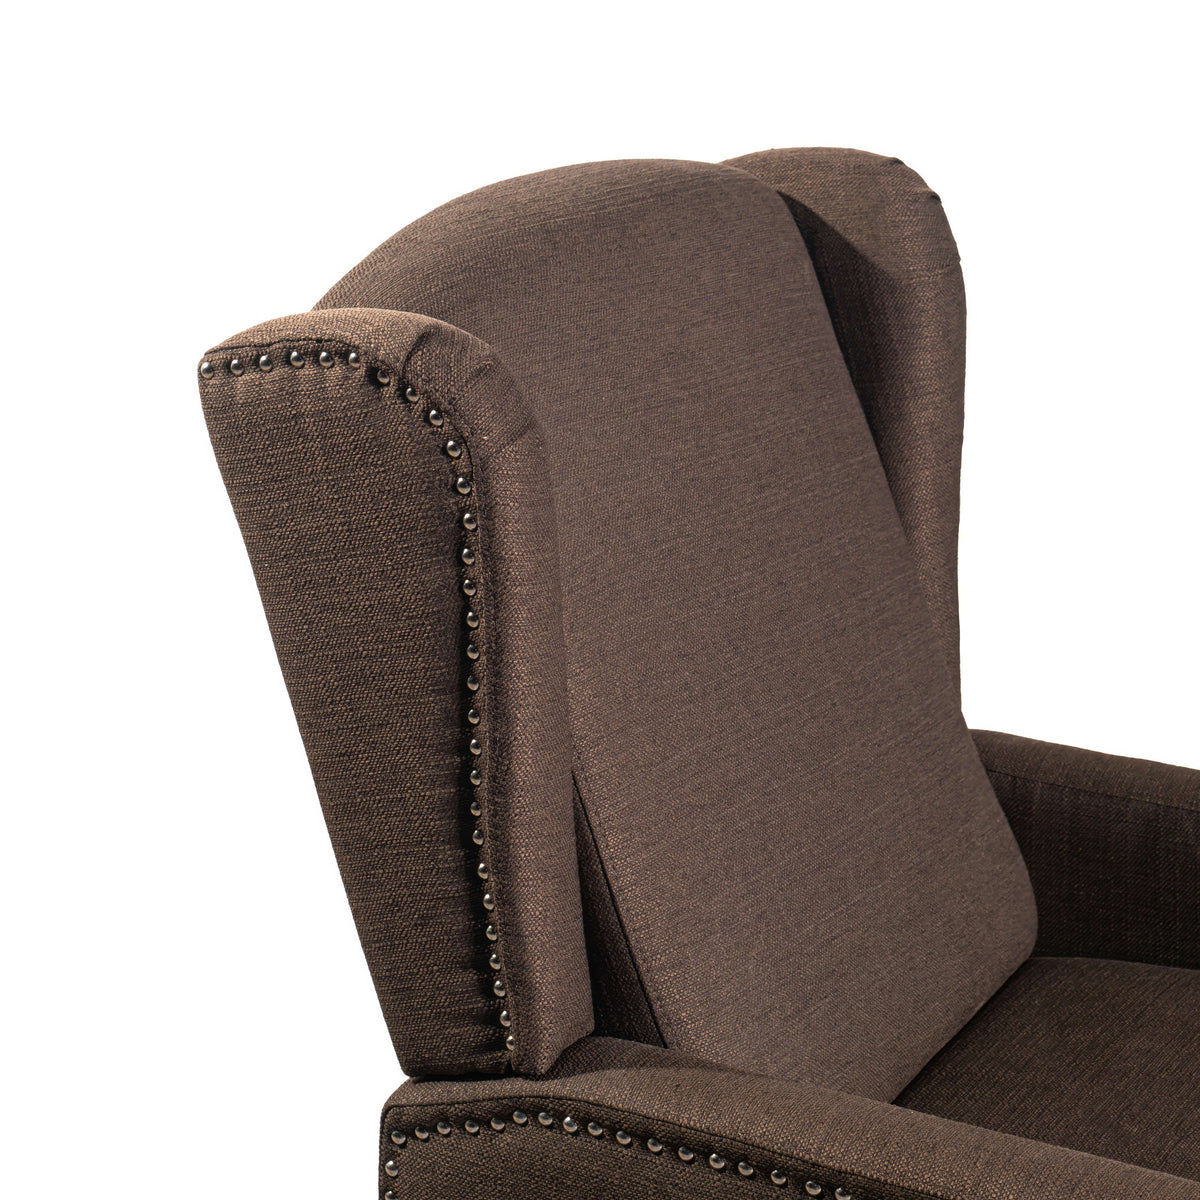 Brown |#| Push Back Wing Back Pocket Spring Recliner in Brown with Side Accent Nail Trim